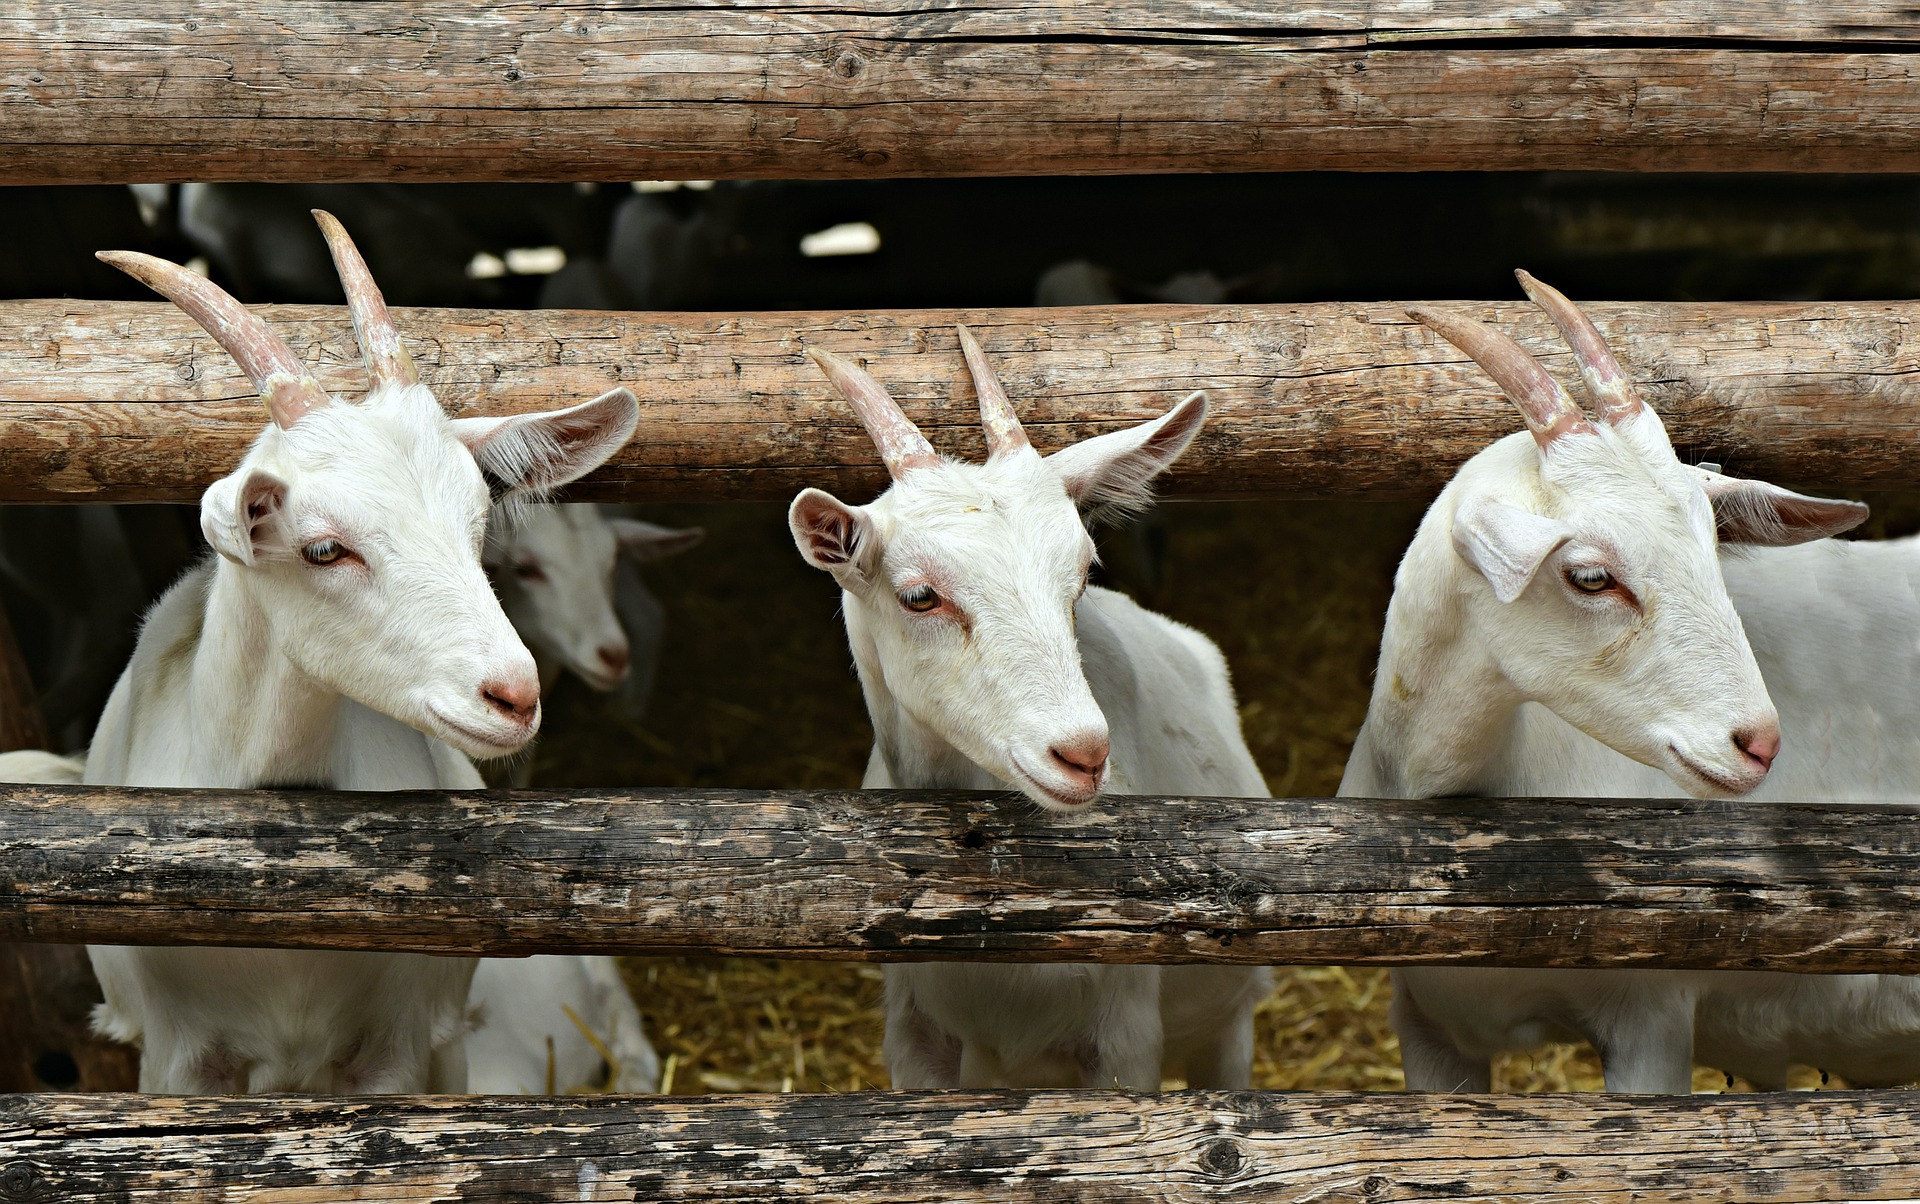 goats Image by ? Mabel Amber from Pixabay